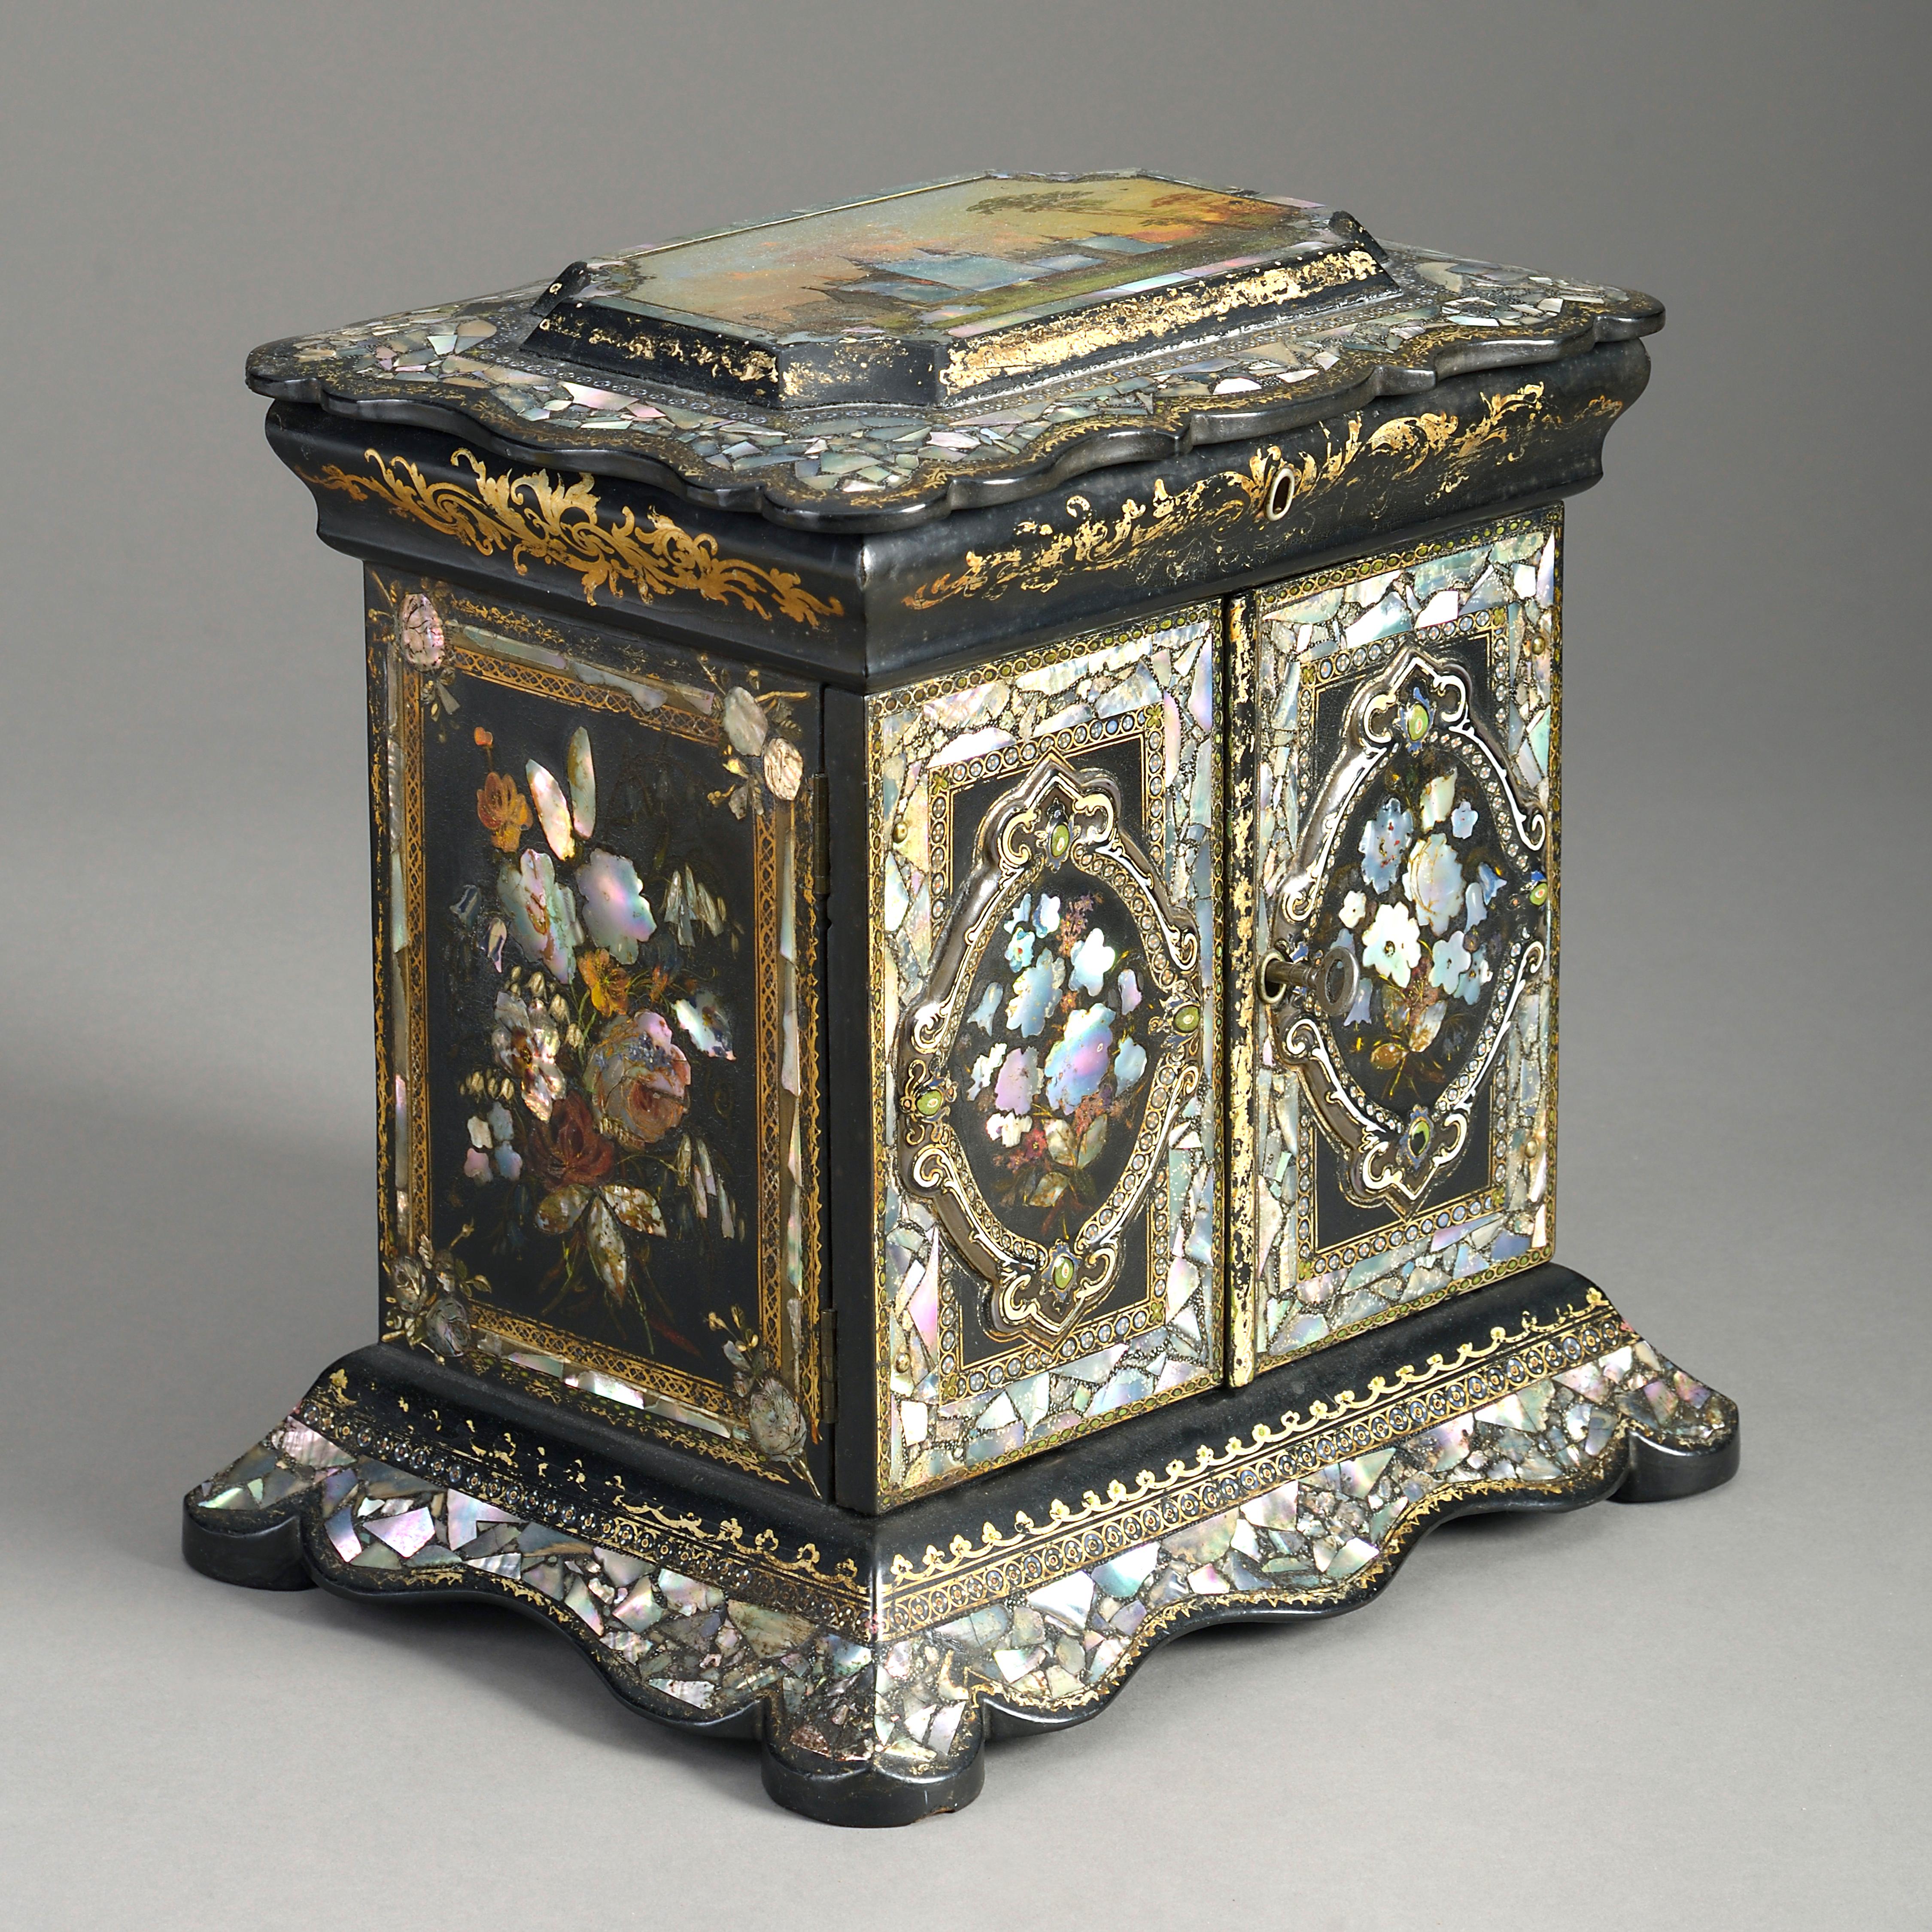 A mid-19th century Victorian Period black japanned sewing box, of architectural form, decorated throughout with mother of pearl floral veneers and gilded scrollwork, having two doors, opening to reveal shelves.